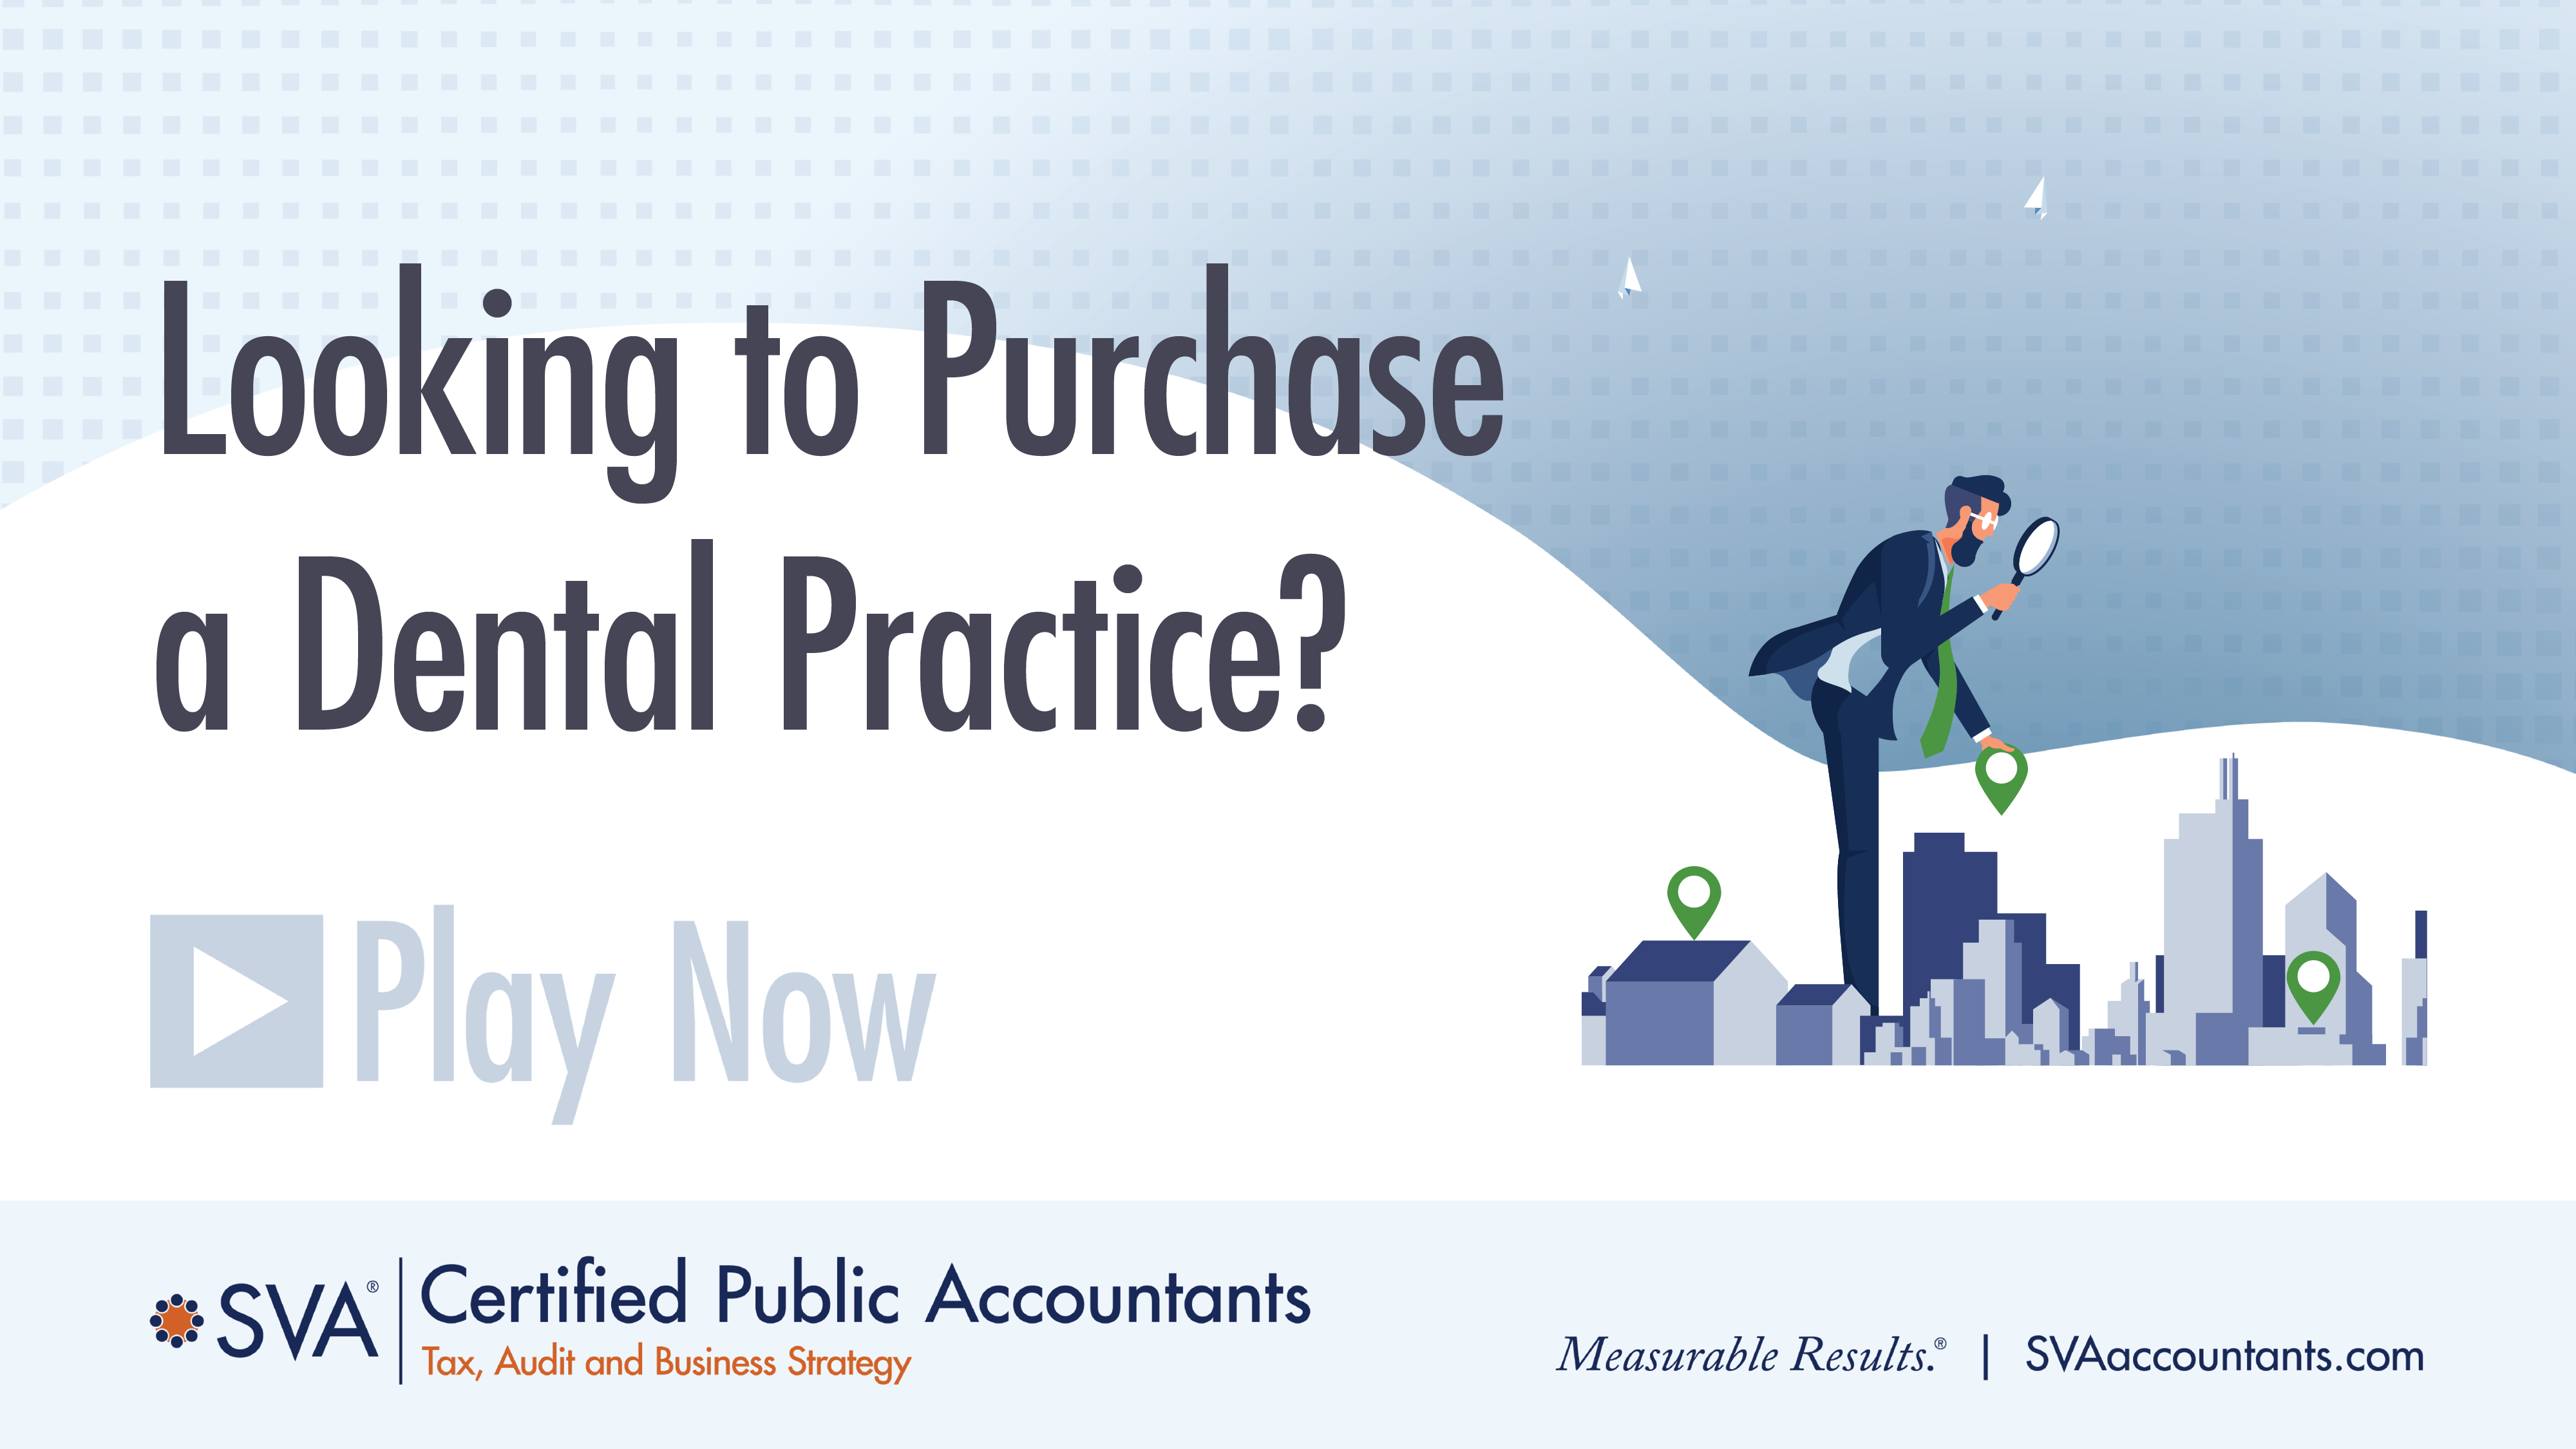 Looking to Purchase a Dental Practice?